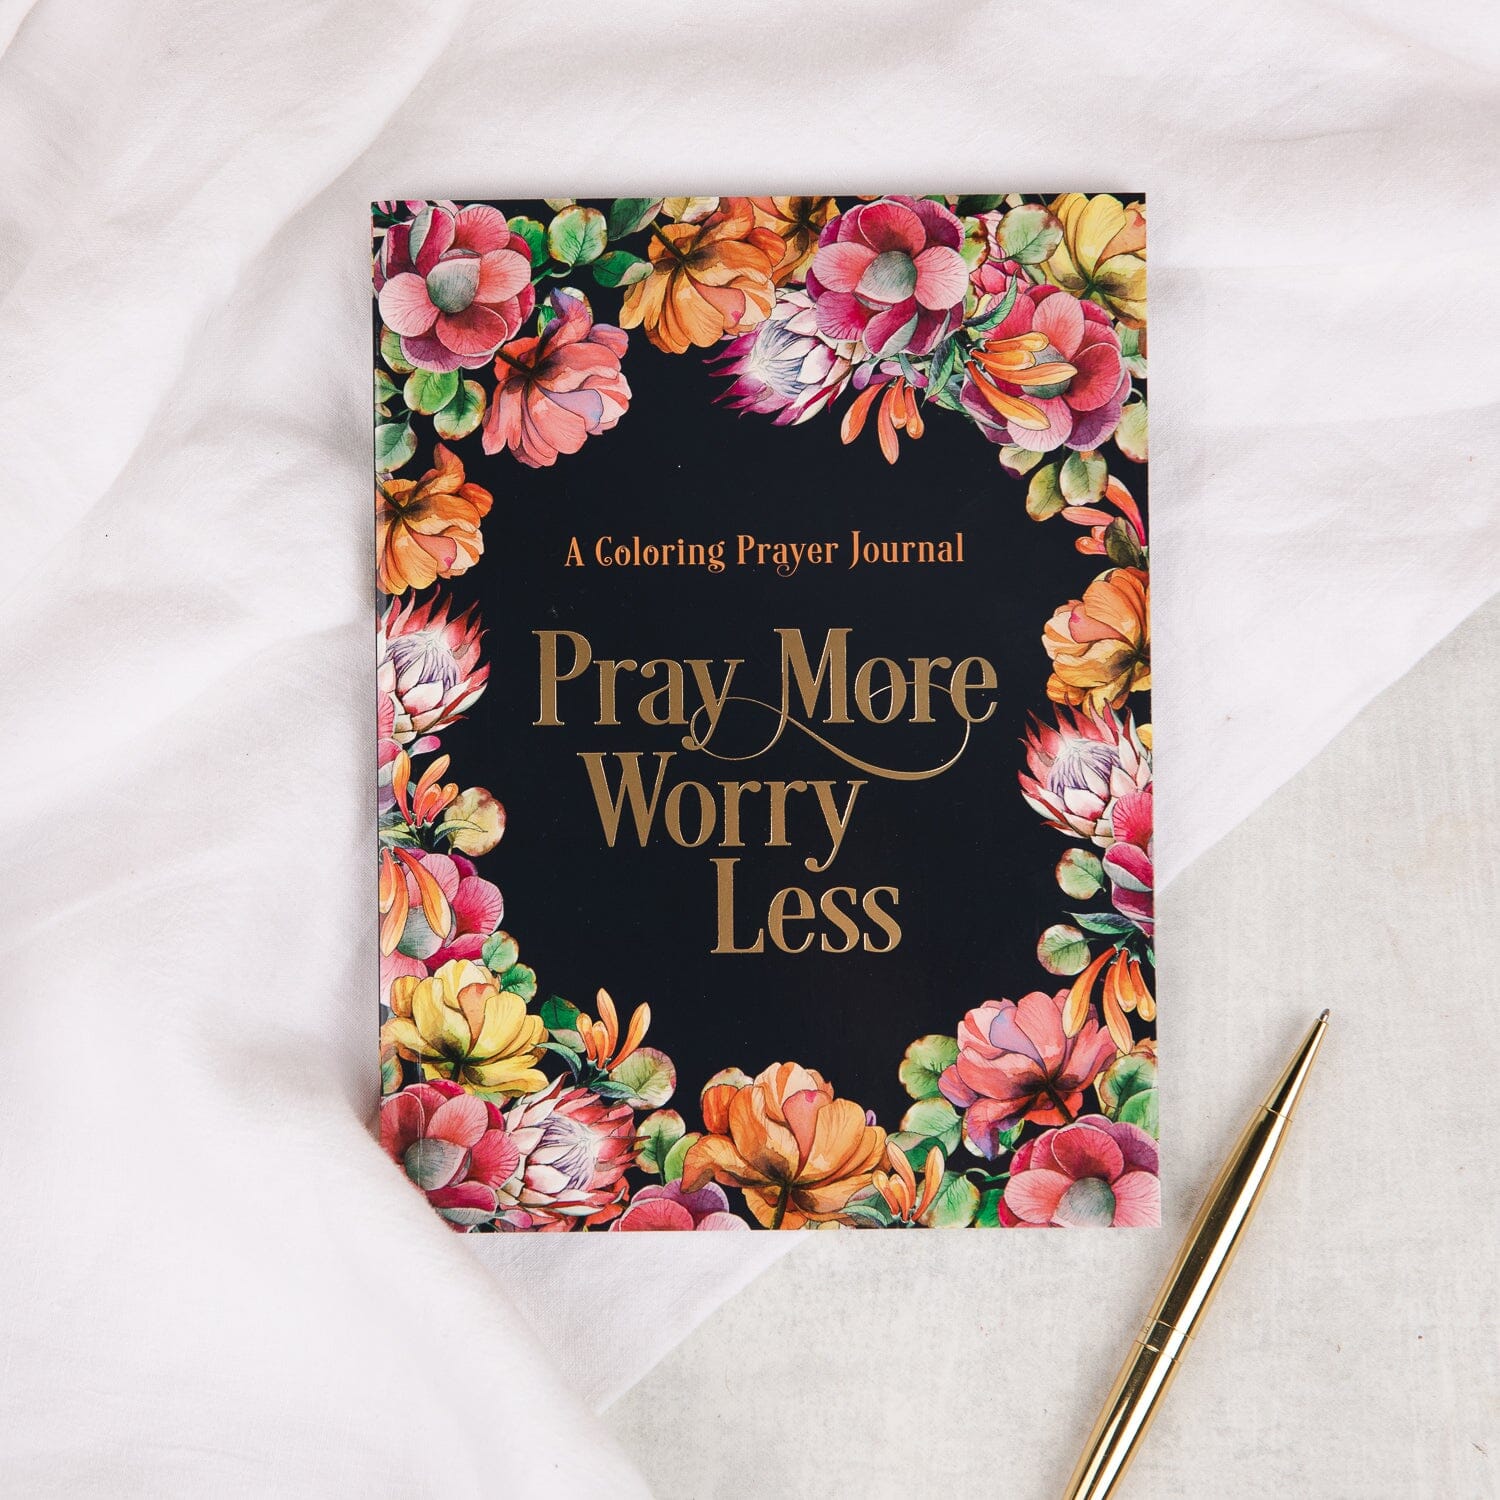 Pray More, Worry Less Coloring Book Prayer Journal  by Christian Art Gifts